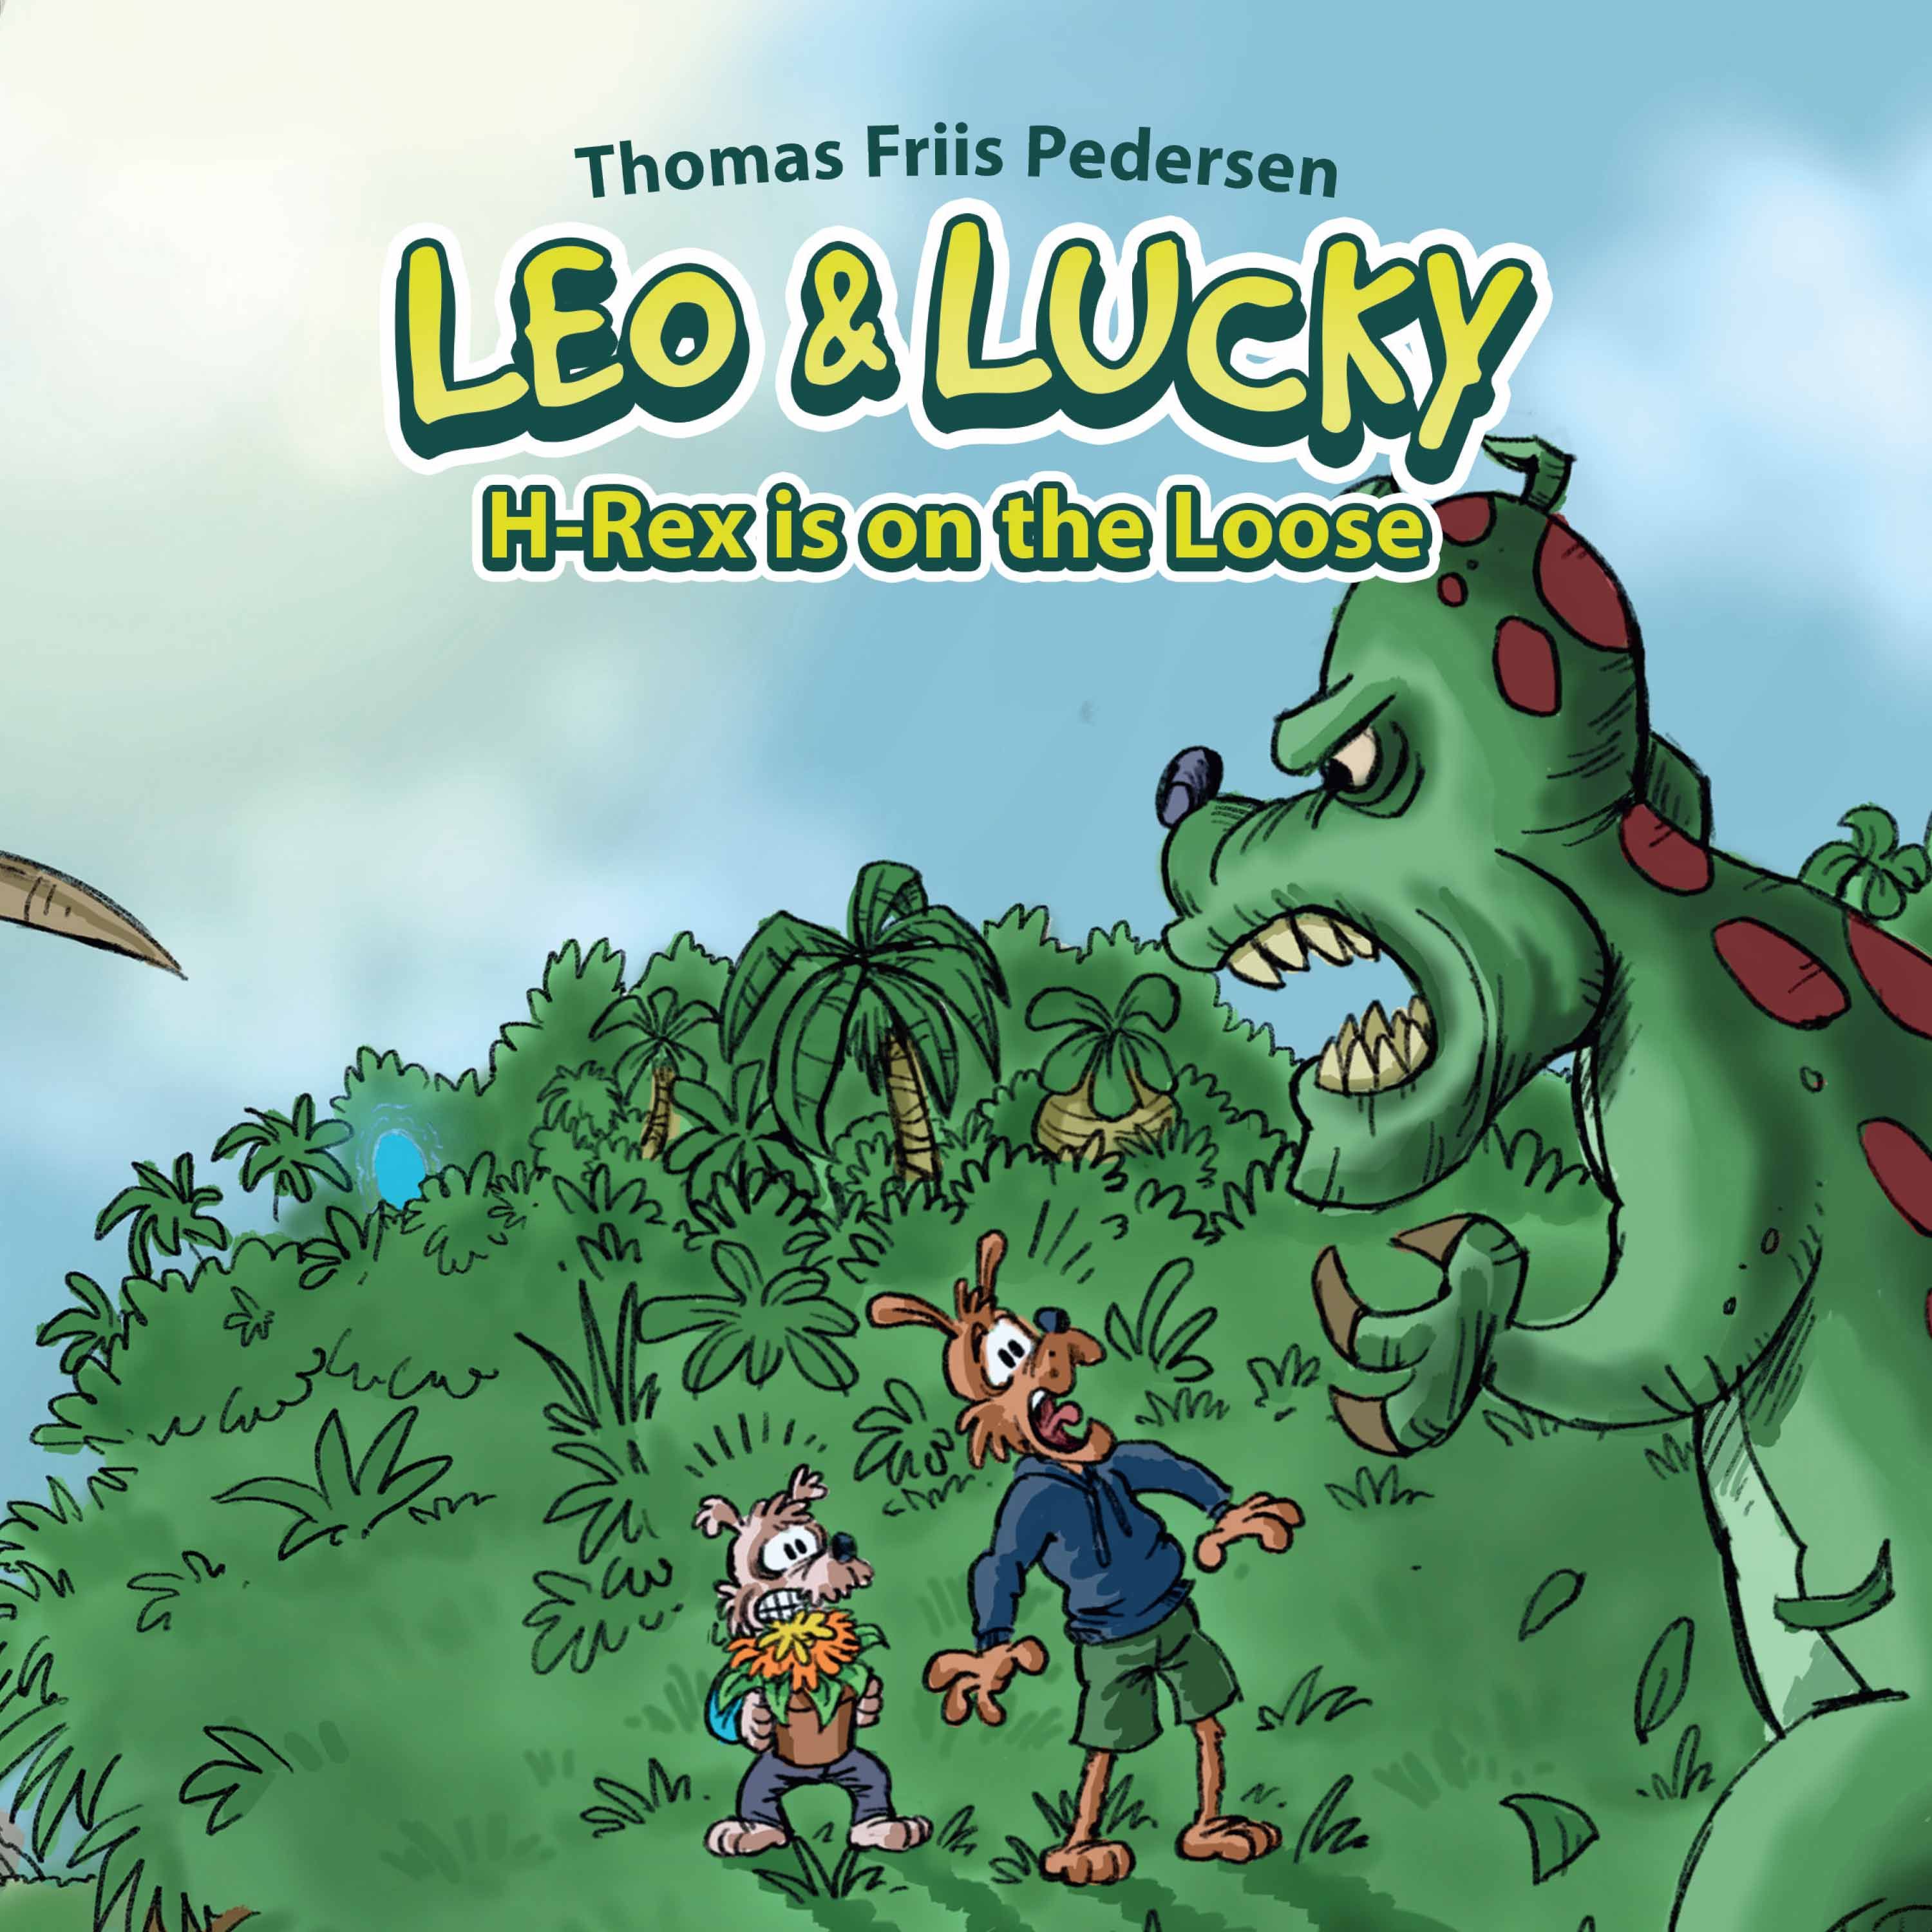 Leo & Lucky #2: H-Rex is on the Loose, audiobook by Thomas Friis Pedersen